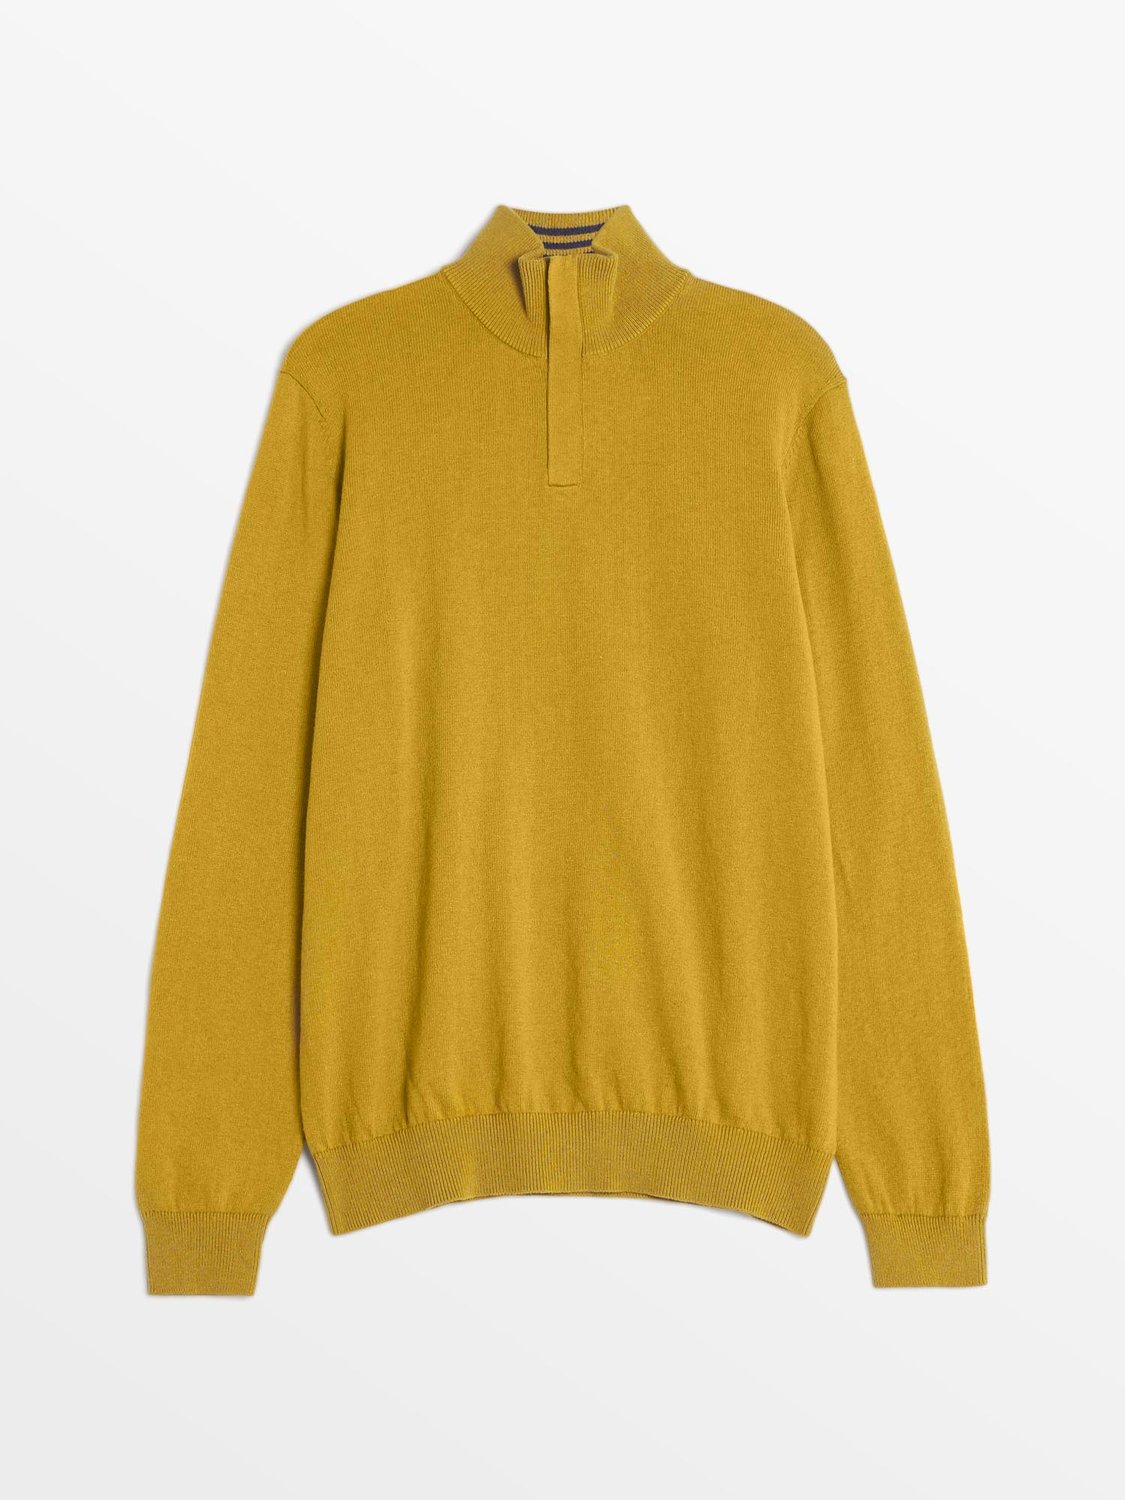 Pull Homme Col Camionneur Jaune